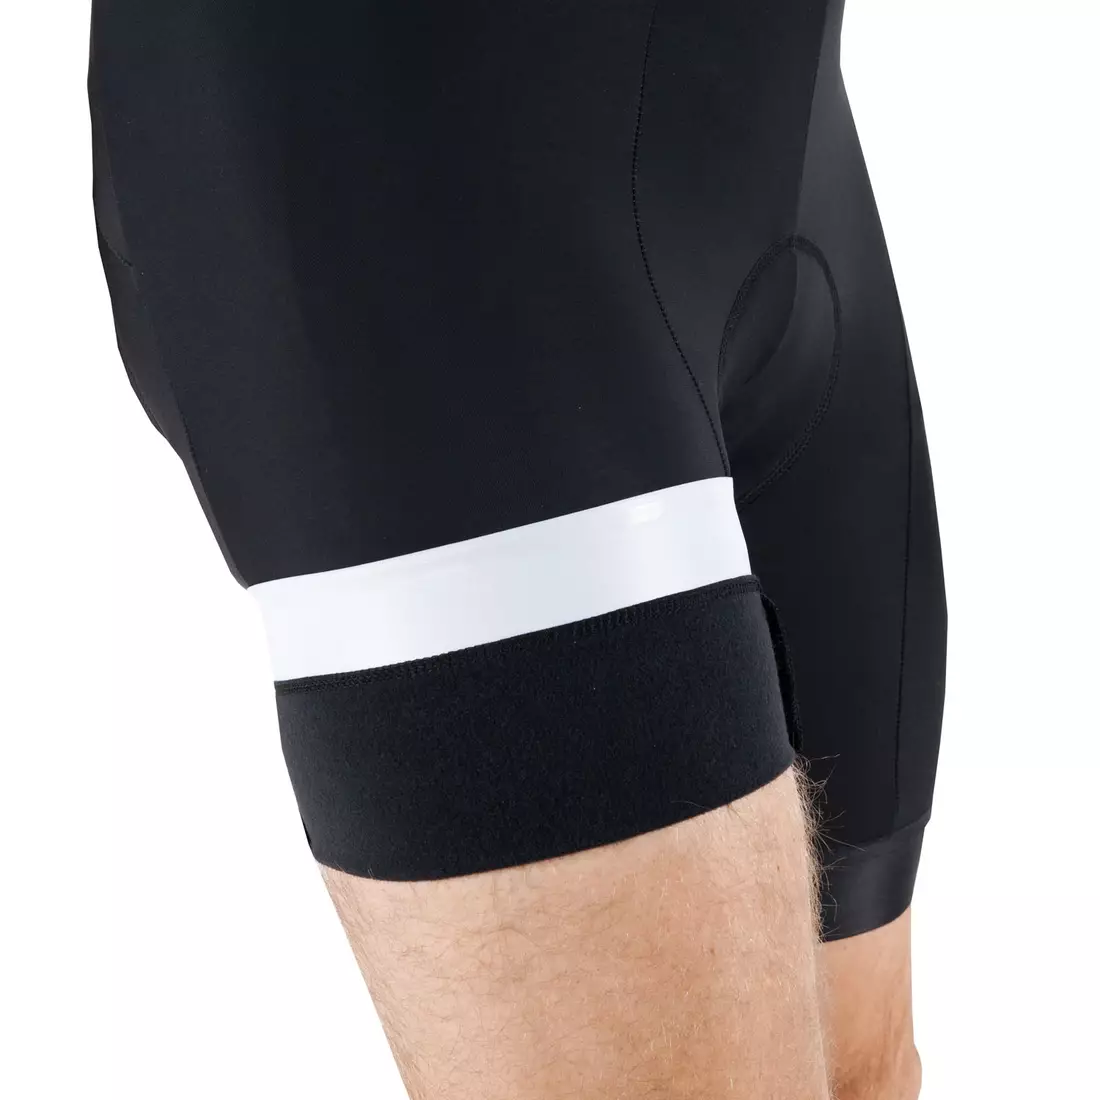 KAYMAQ DESIGN KYBT34 Insulated cycling shorts for men with suspenders, black